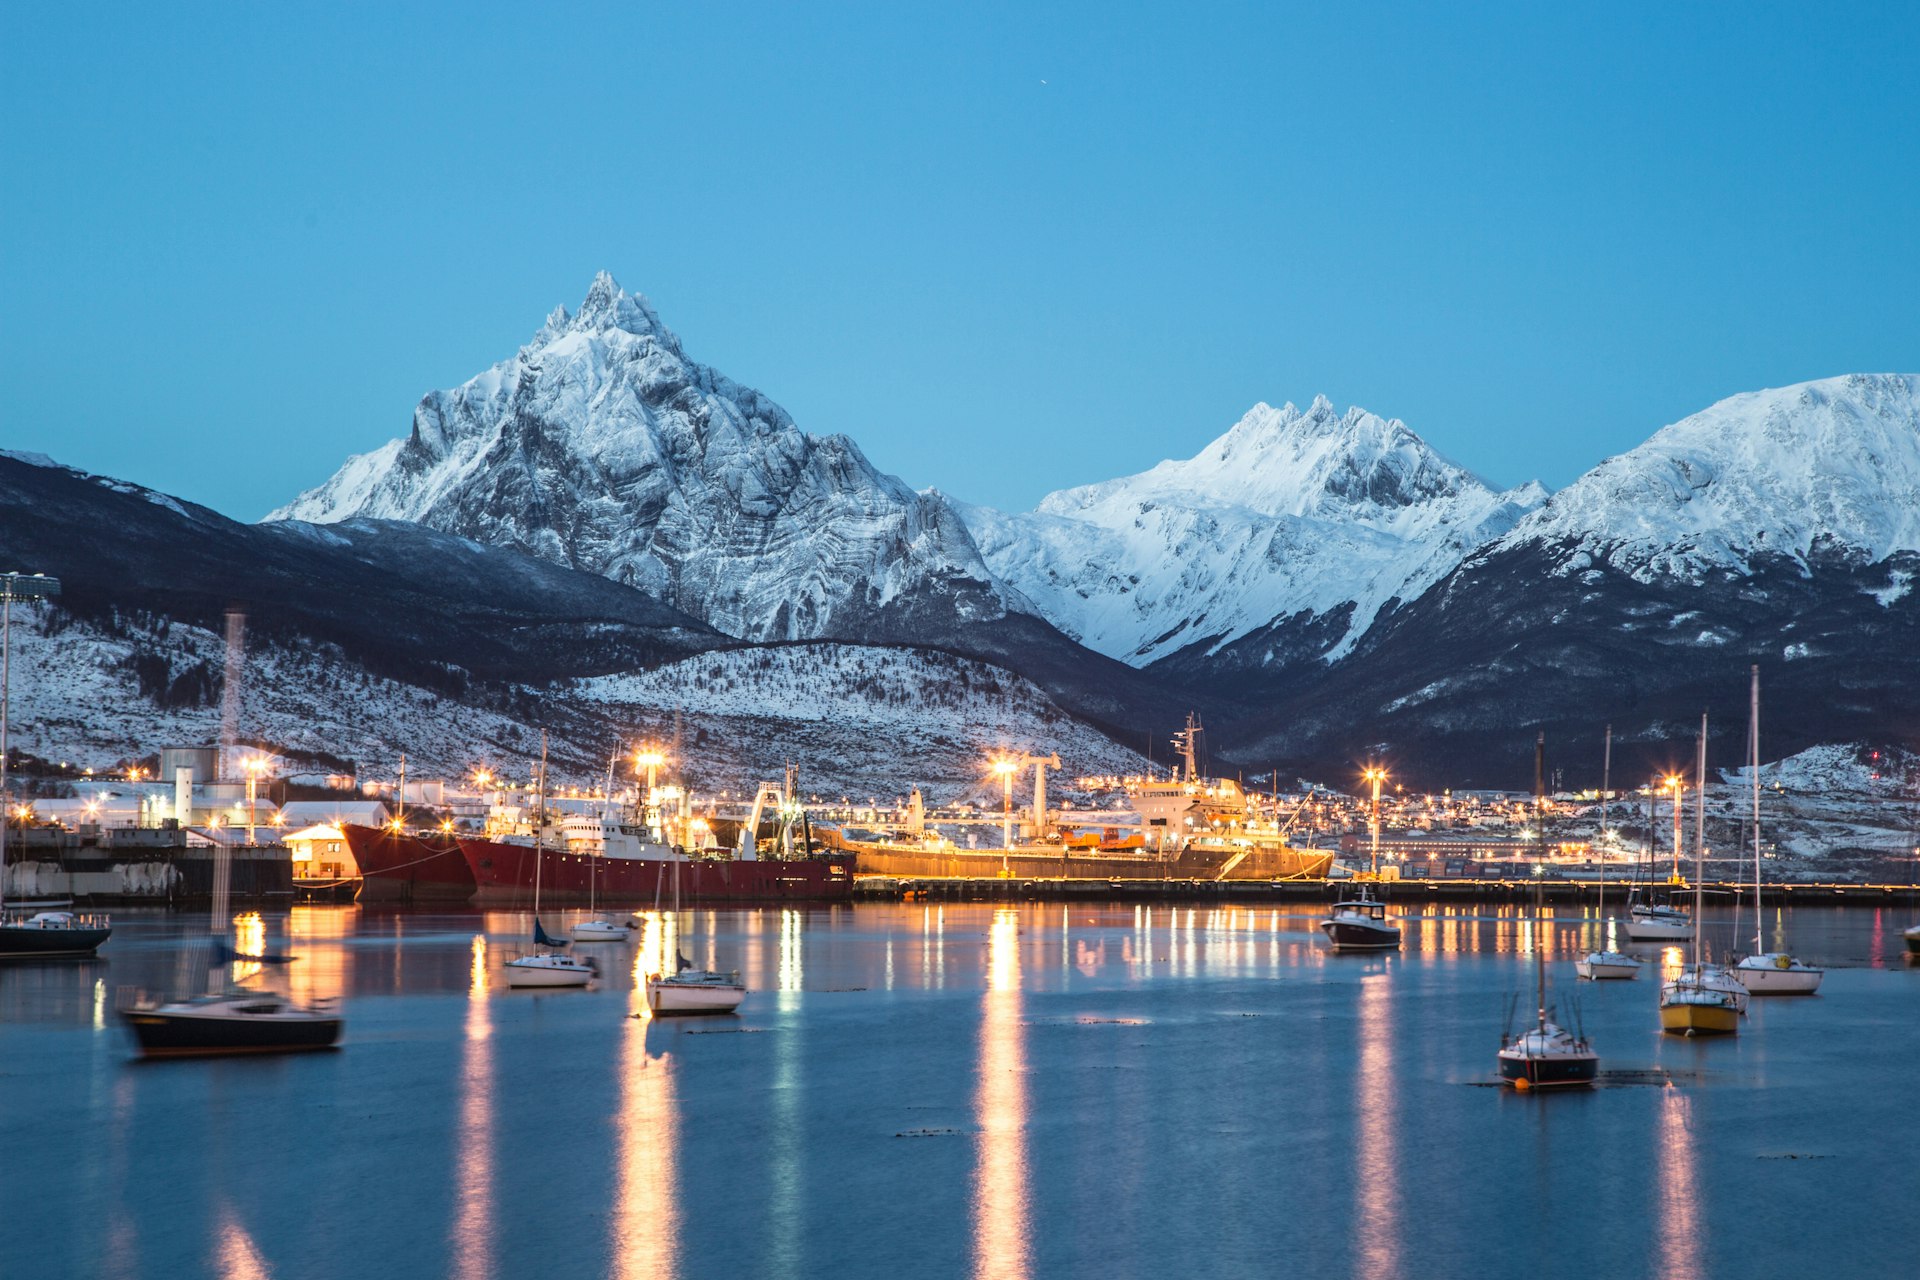 The port of Ushuaia at night surrounded by snow-capped mountains, Ushuaia, Patagonia, Argentina, South America